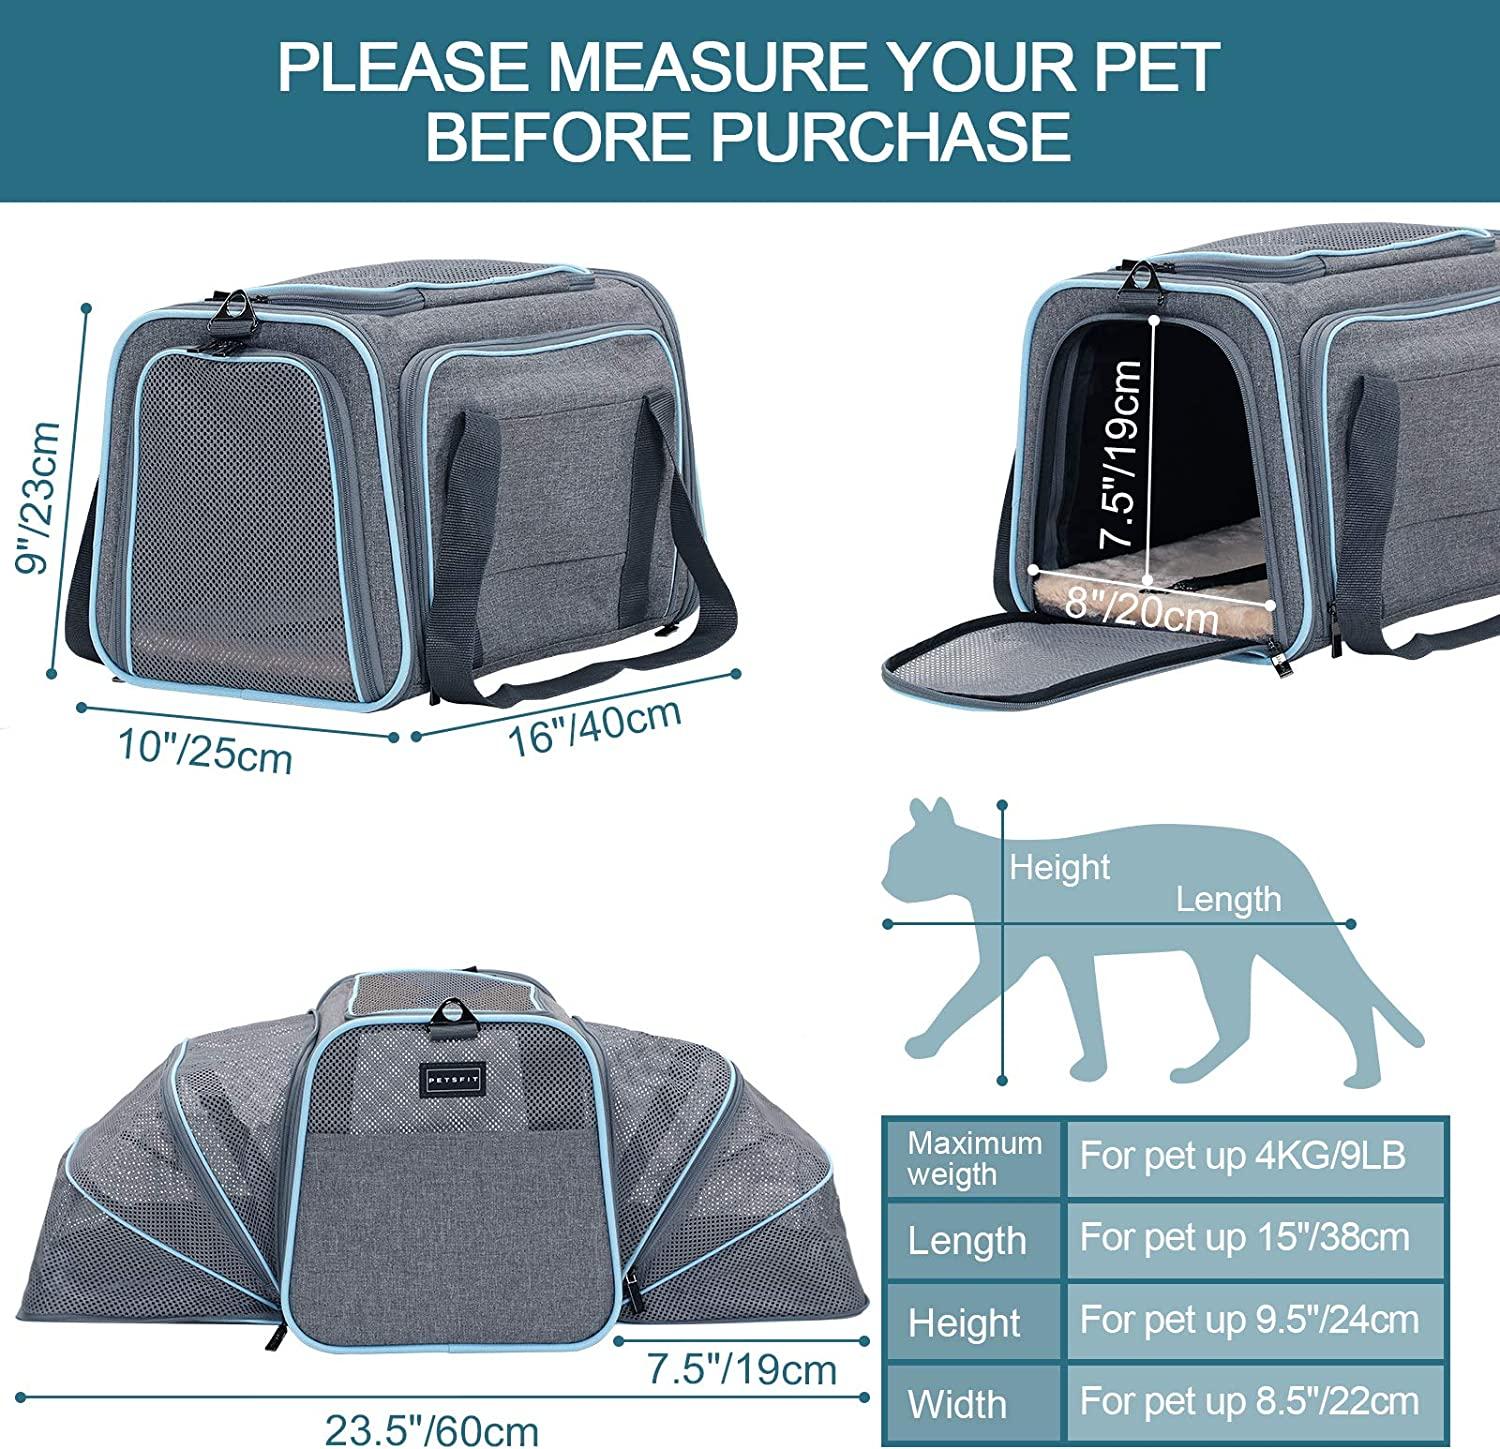 Pet Life 16.1-in x 9.5-in x 10-in Gray Collapsible Nylon Small Dog/Cat Bag  at